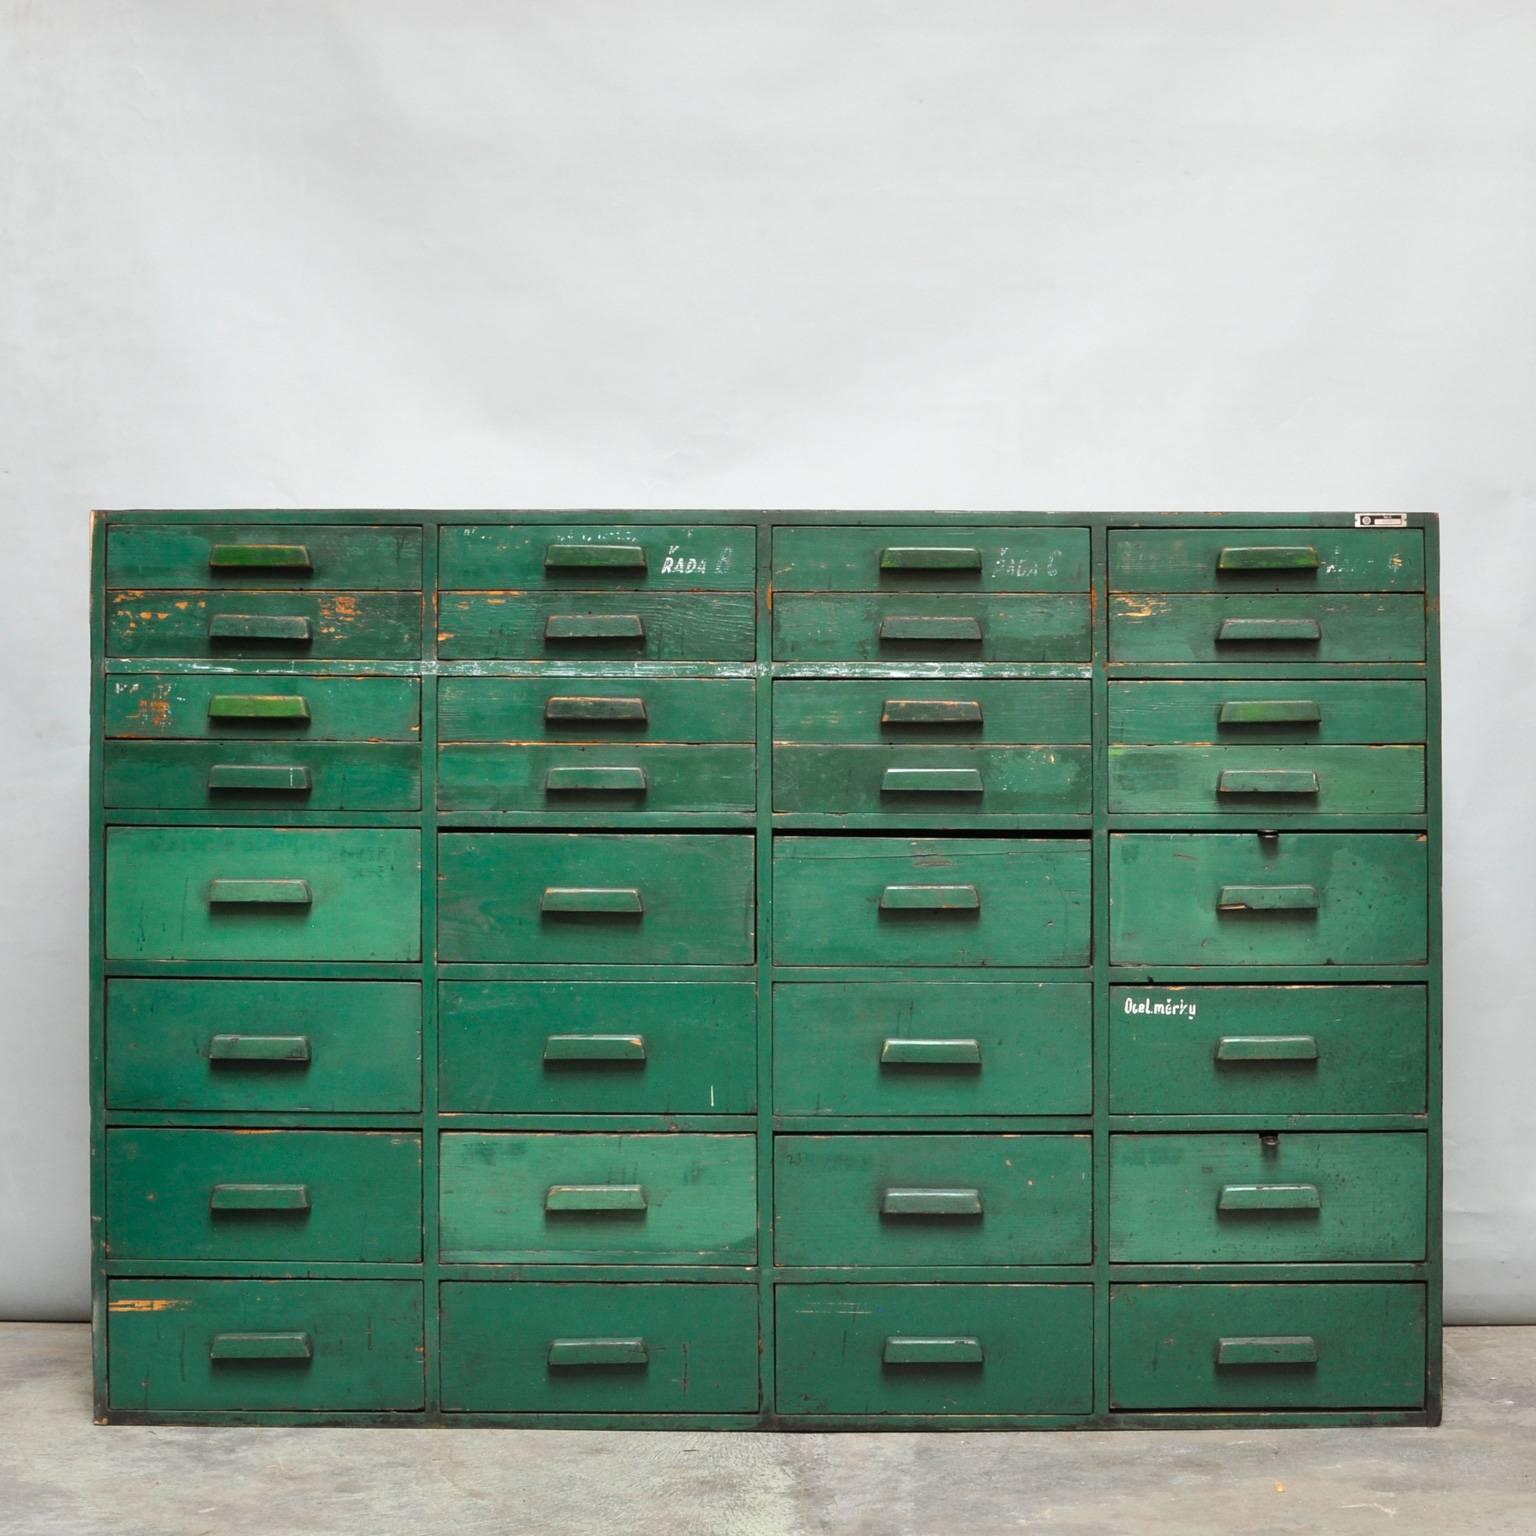 Industrial cabinet from the factory of car manufacturer Tatia from the Czech Republic. Made of wood with 32 drawers. Made in the 1950s.